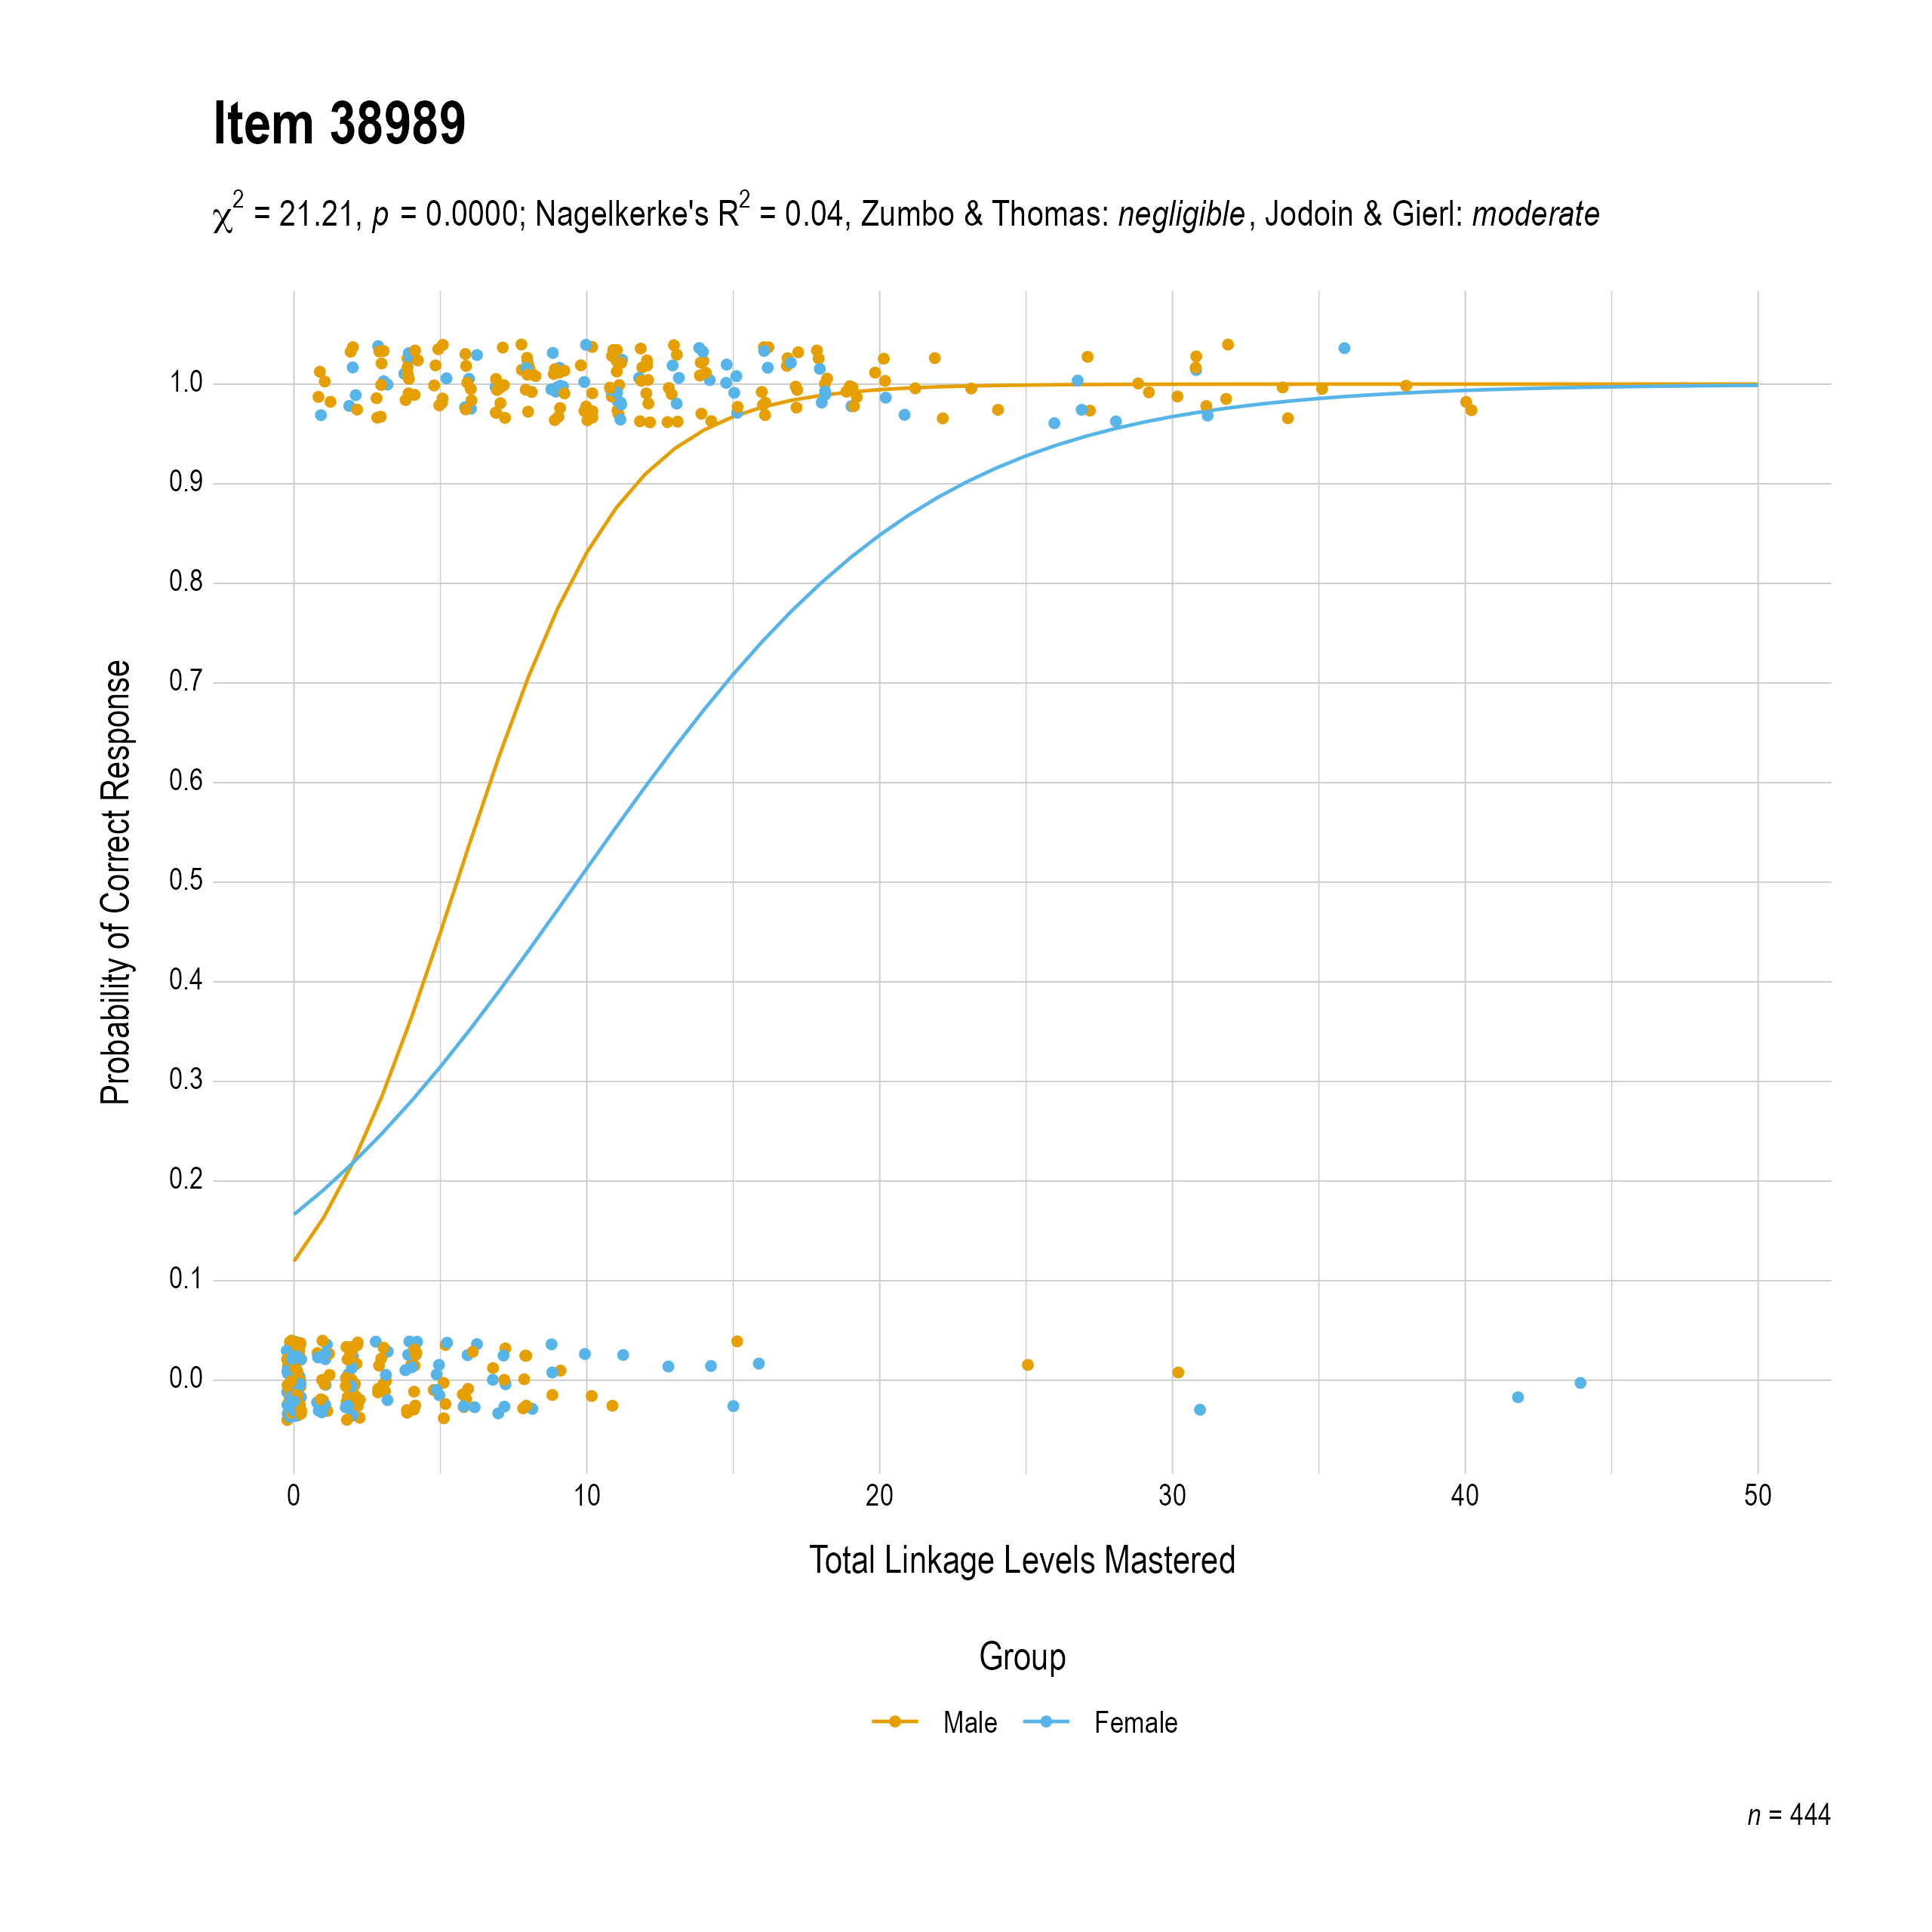 The plot of the combined gender differential item function evidence for English language arts item 38989. The figure contains points shaded by group. The figure also contains a logistic regression curve for each group. The total linkage levels mastered in is on the x-axis, and the probability of a correct response is on the y-axis.